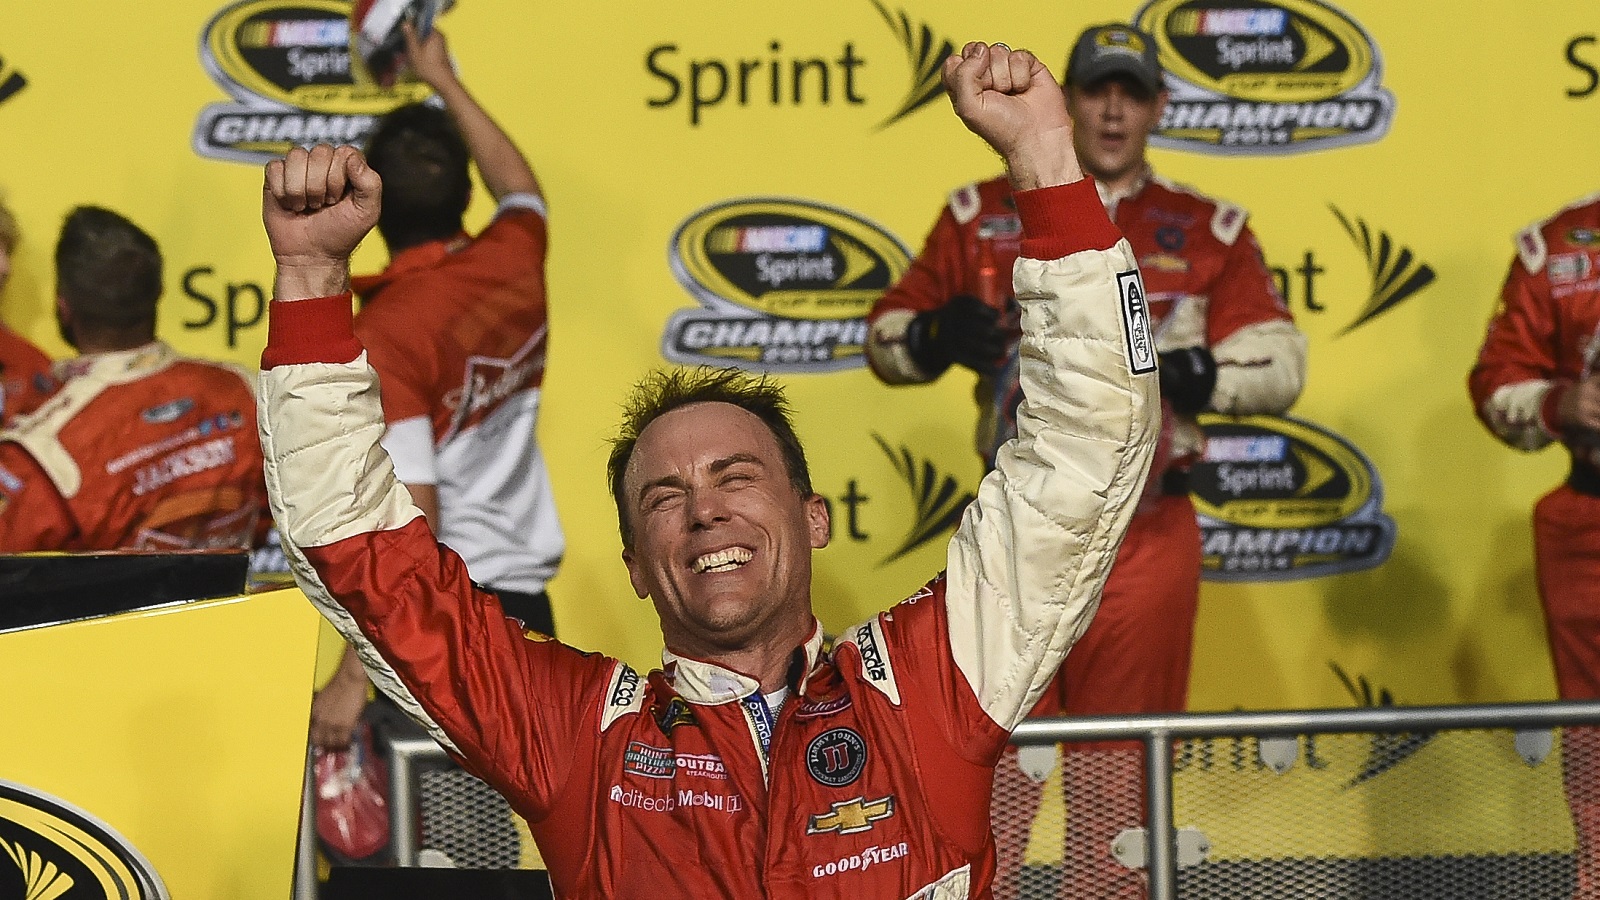 Kevin Harvick celebrates after winning during the NASCAR Sprint Cup Series Ford EcoBoost 400 at Homestead-Miami Speedway on Nov. 16, 2014.